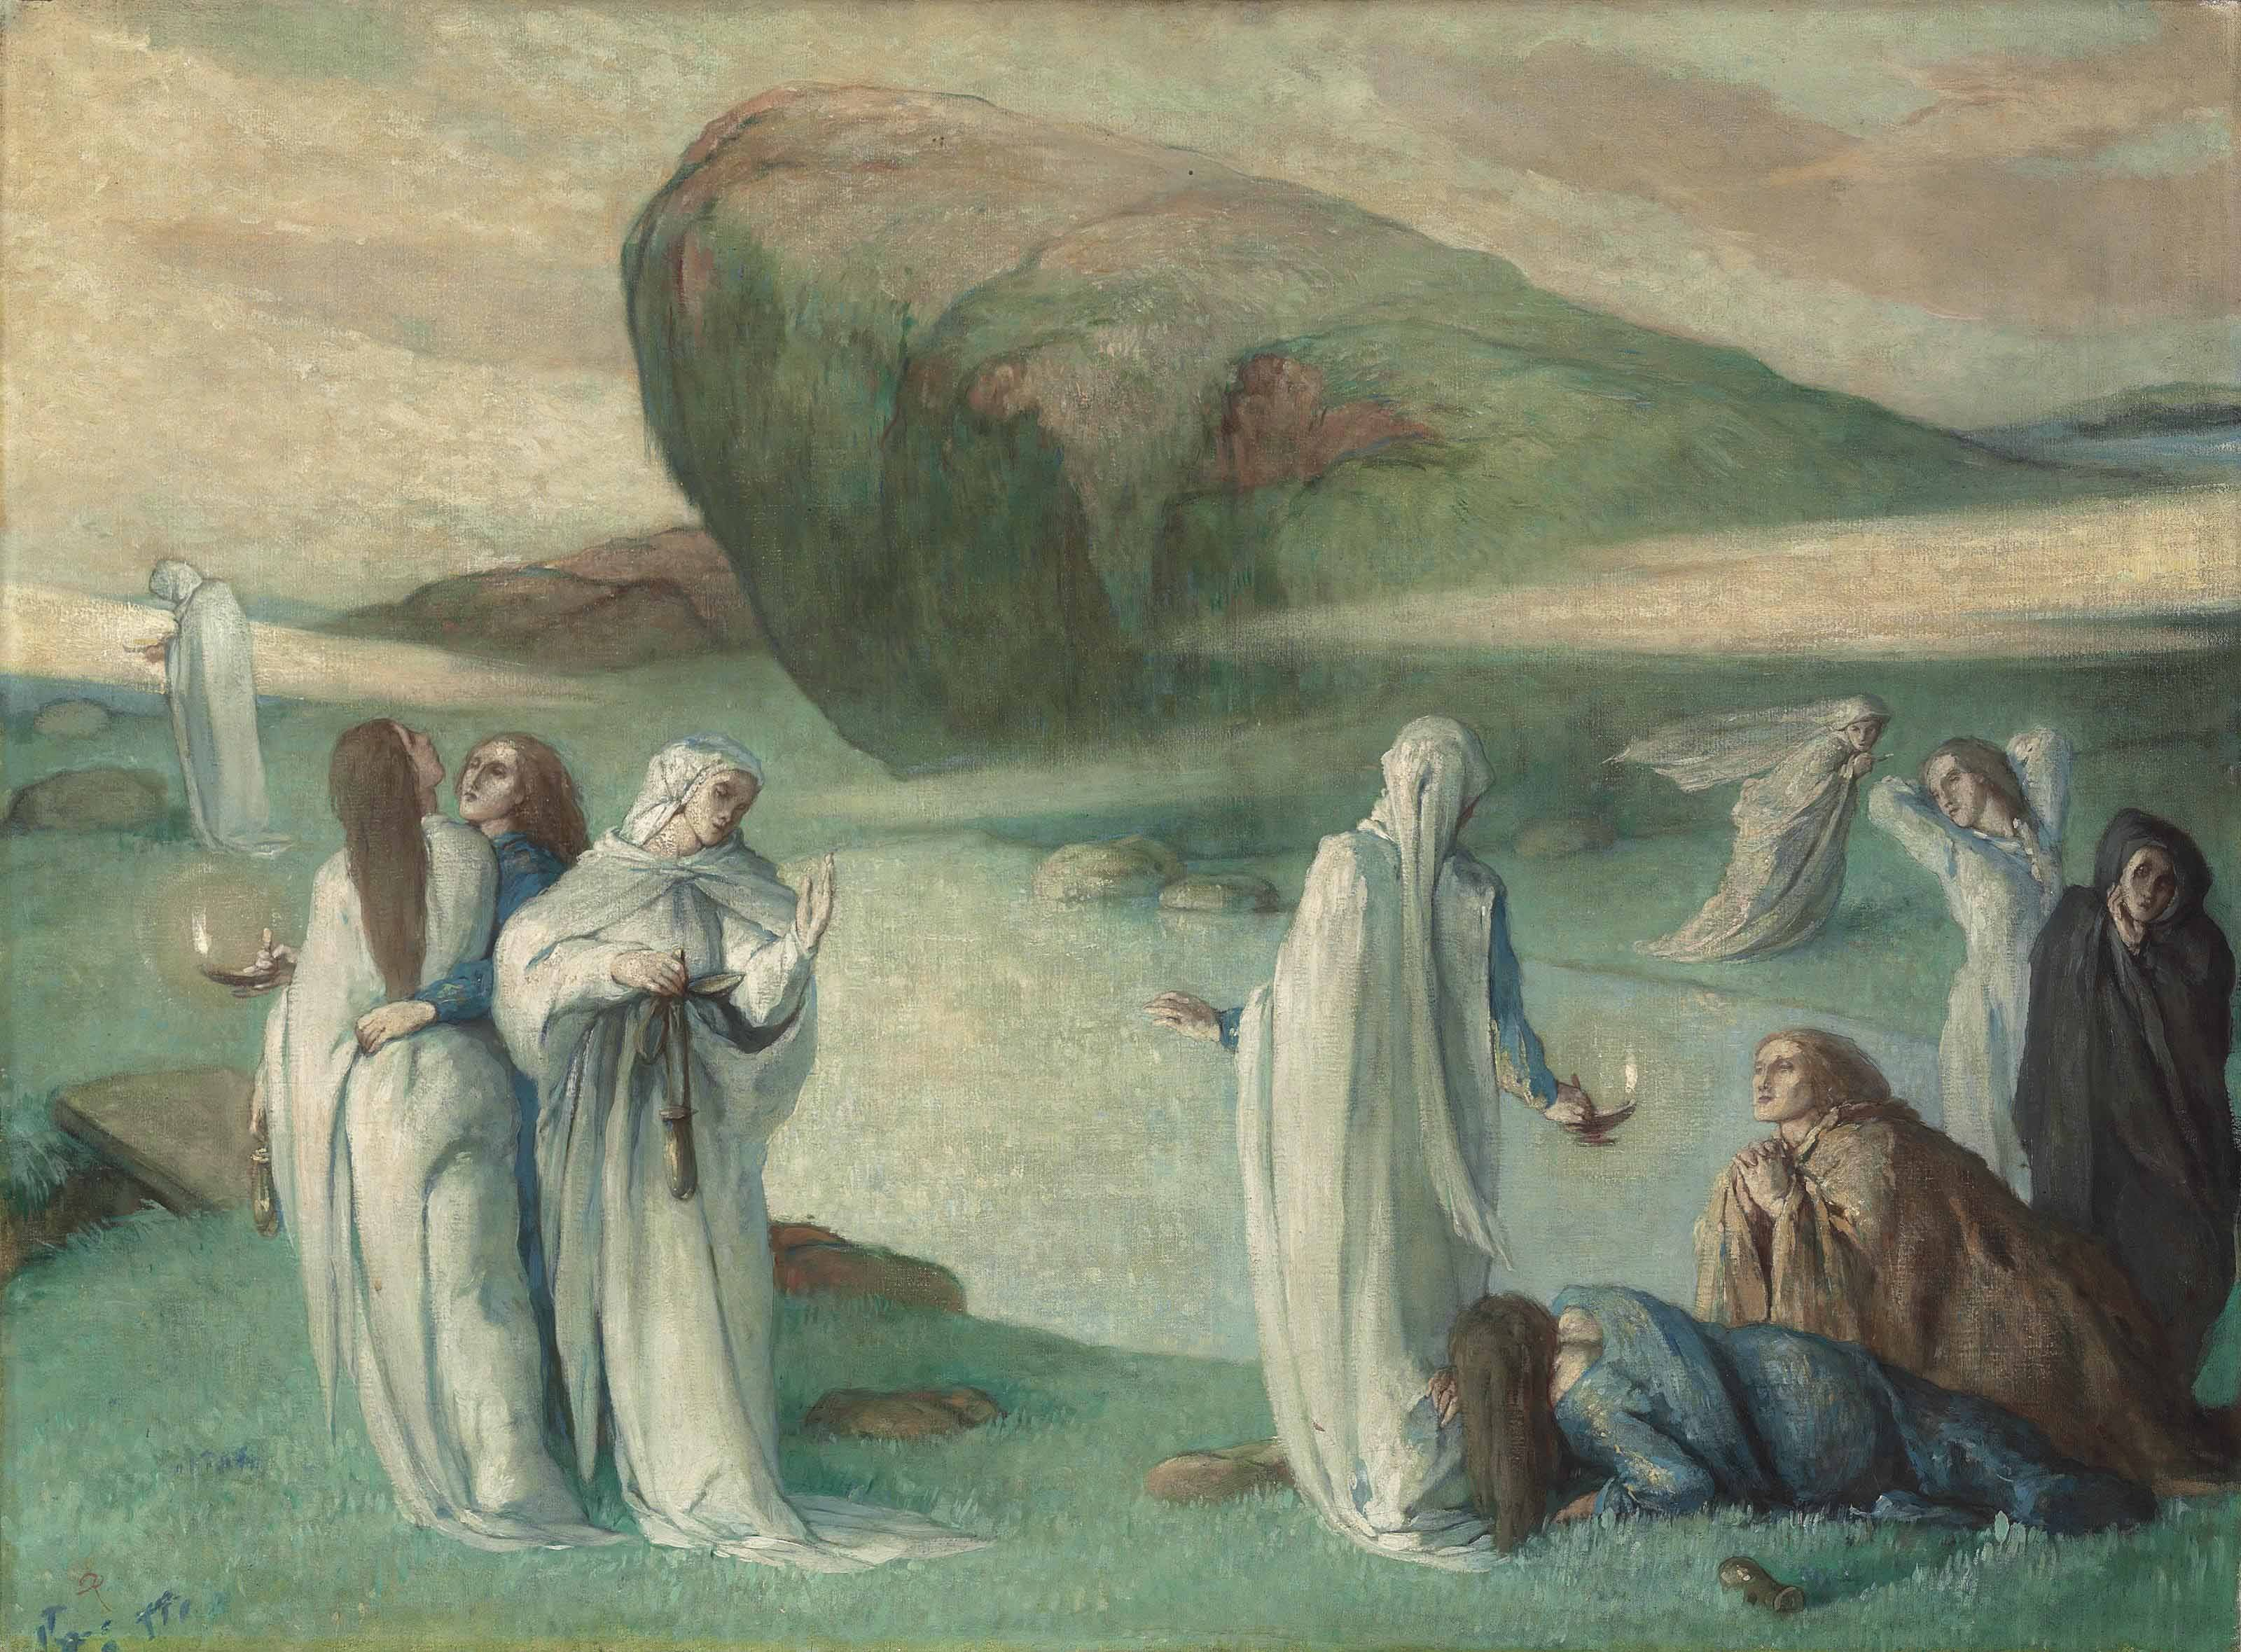 Charles Ricketts - The Wise and Foolish Virgins